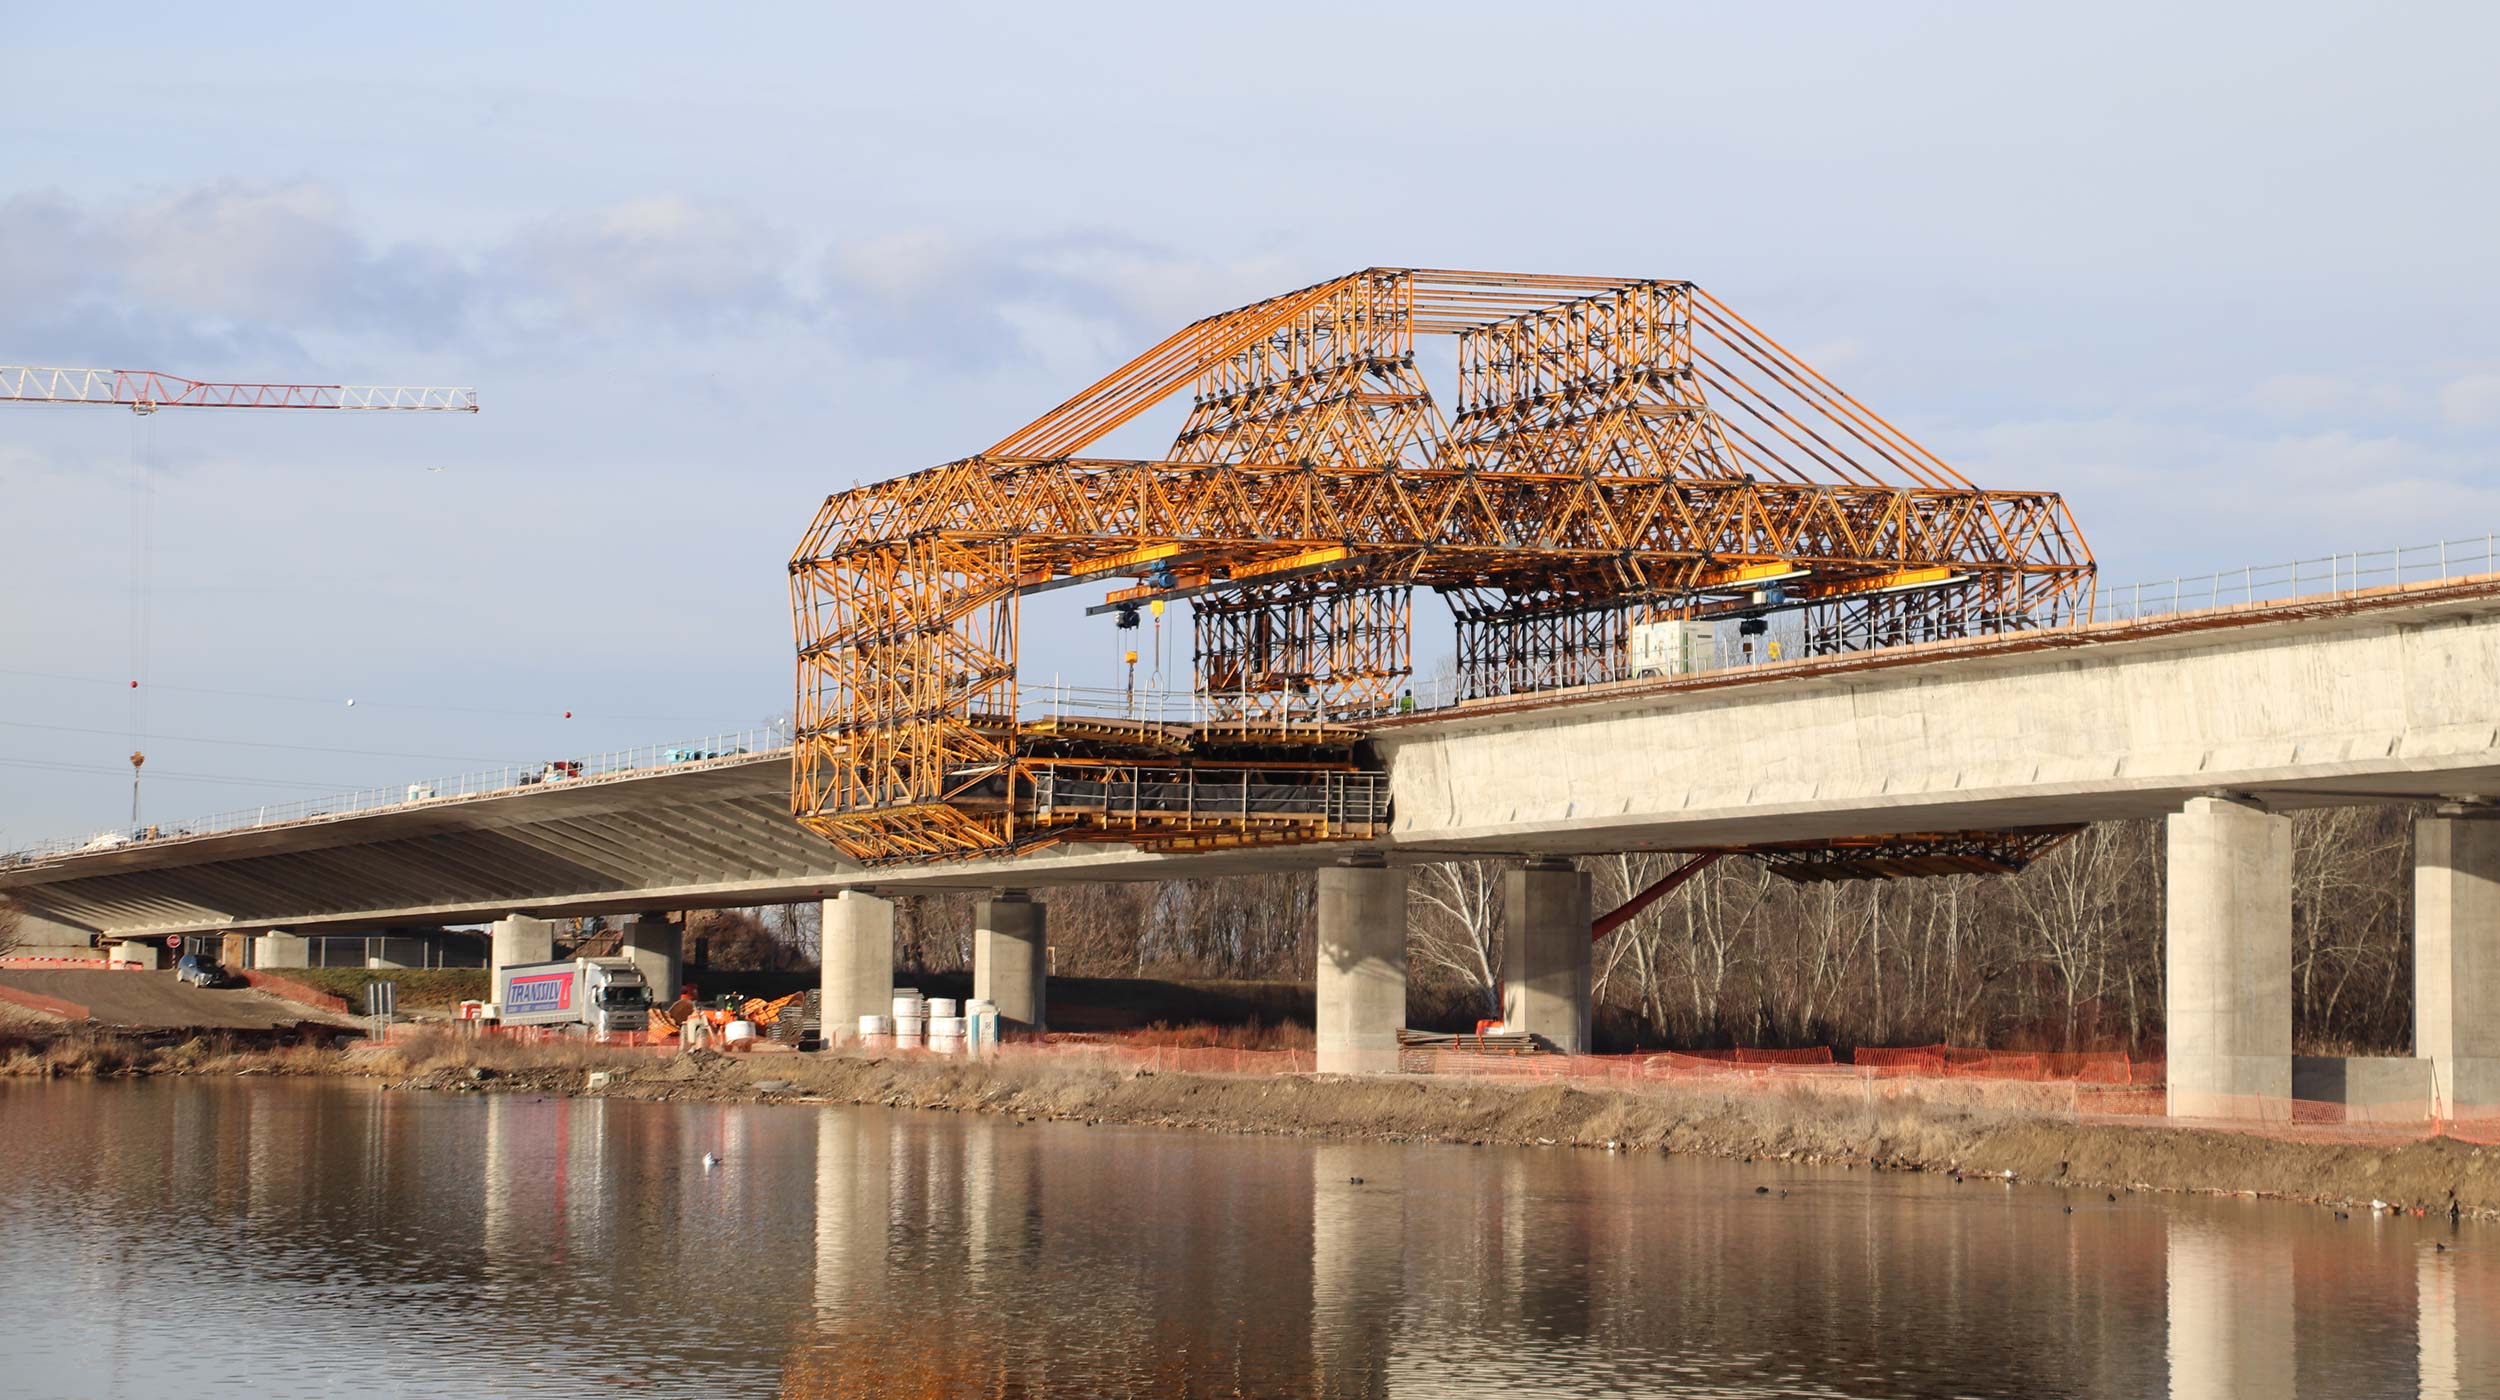 The D4R7-Bratislava project in Slovakia includes the construction of 27 km of the D4 Motorway and 32 km of the R7 Expressway, as well as 14 intersections, and more than 100 bridges, including the sizeable Danube Bridge.